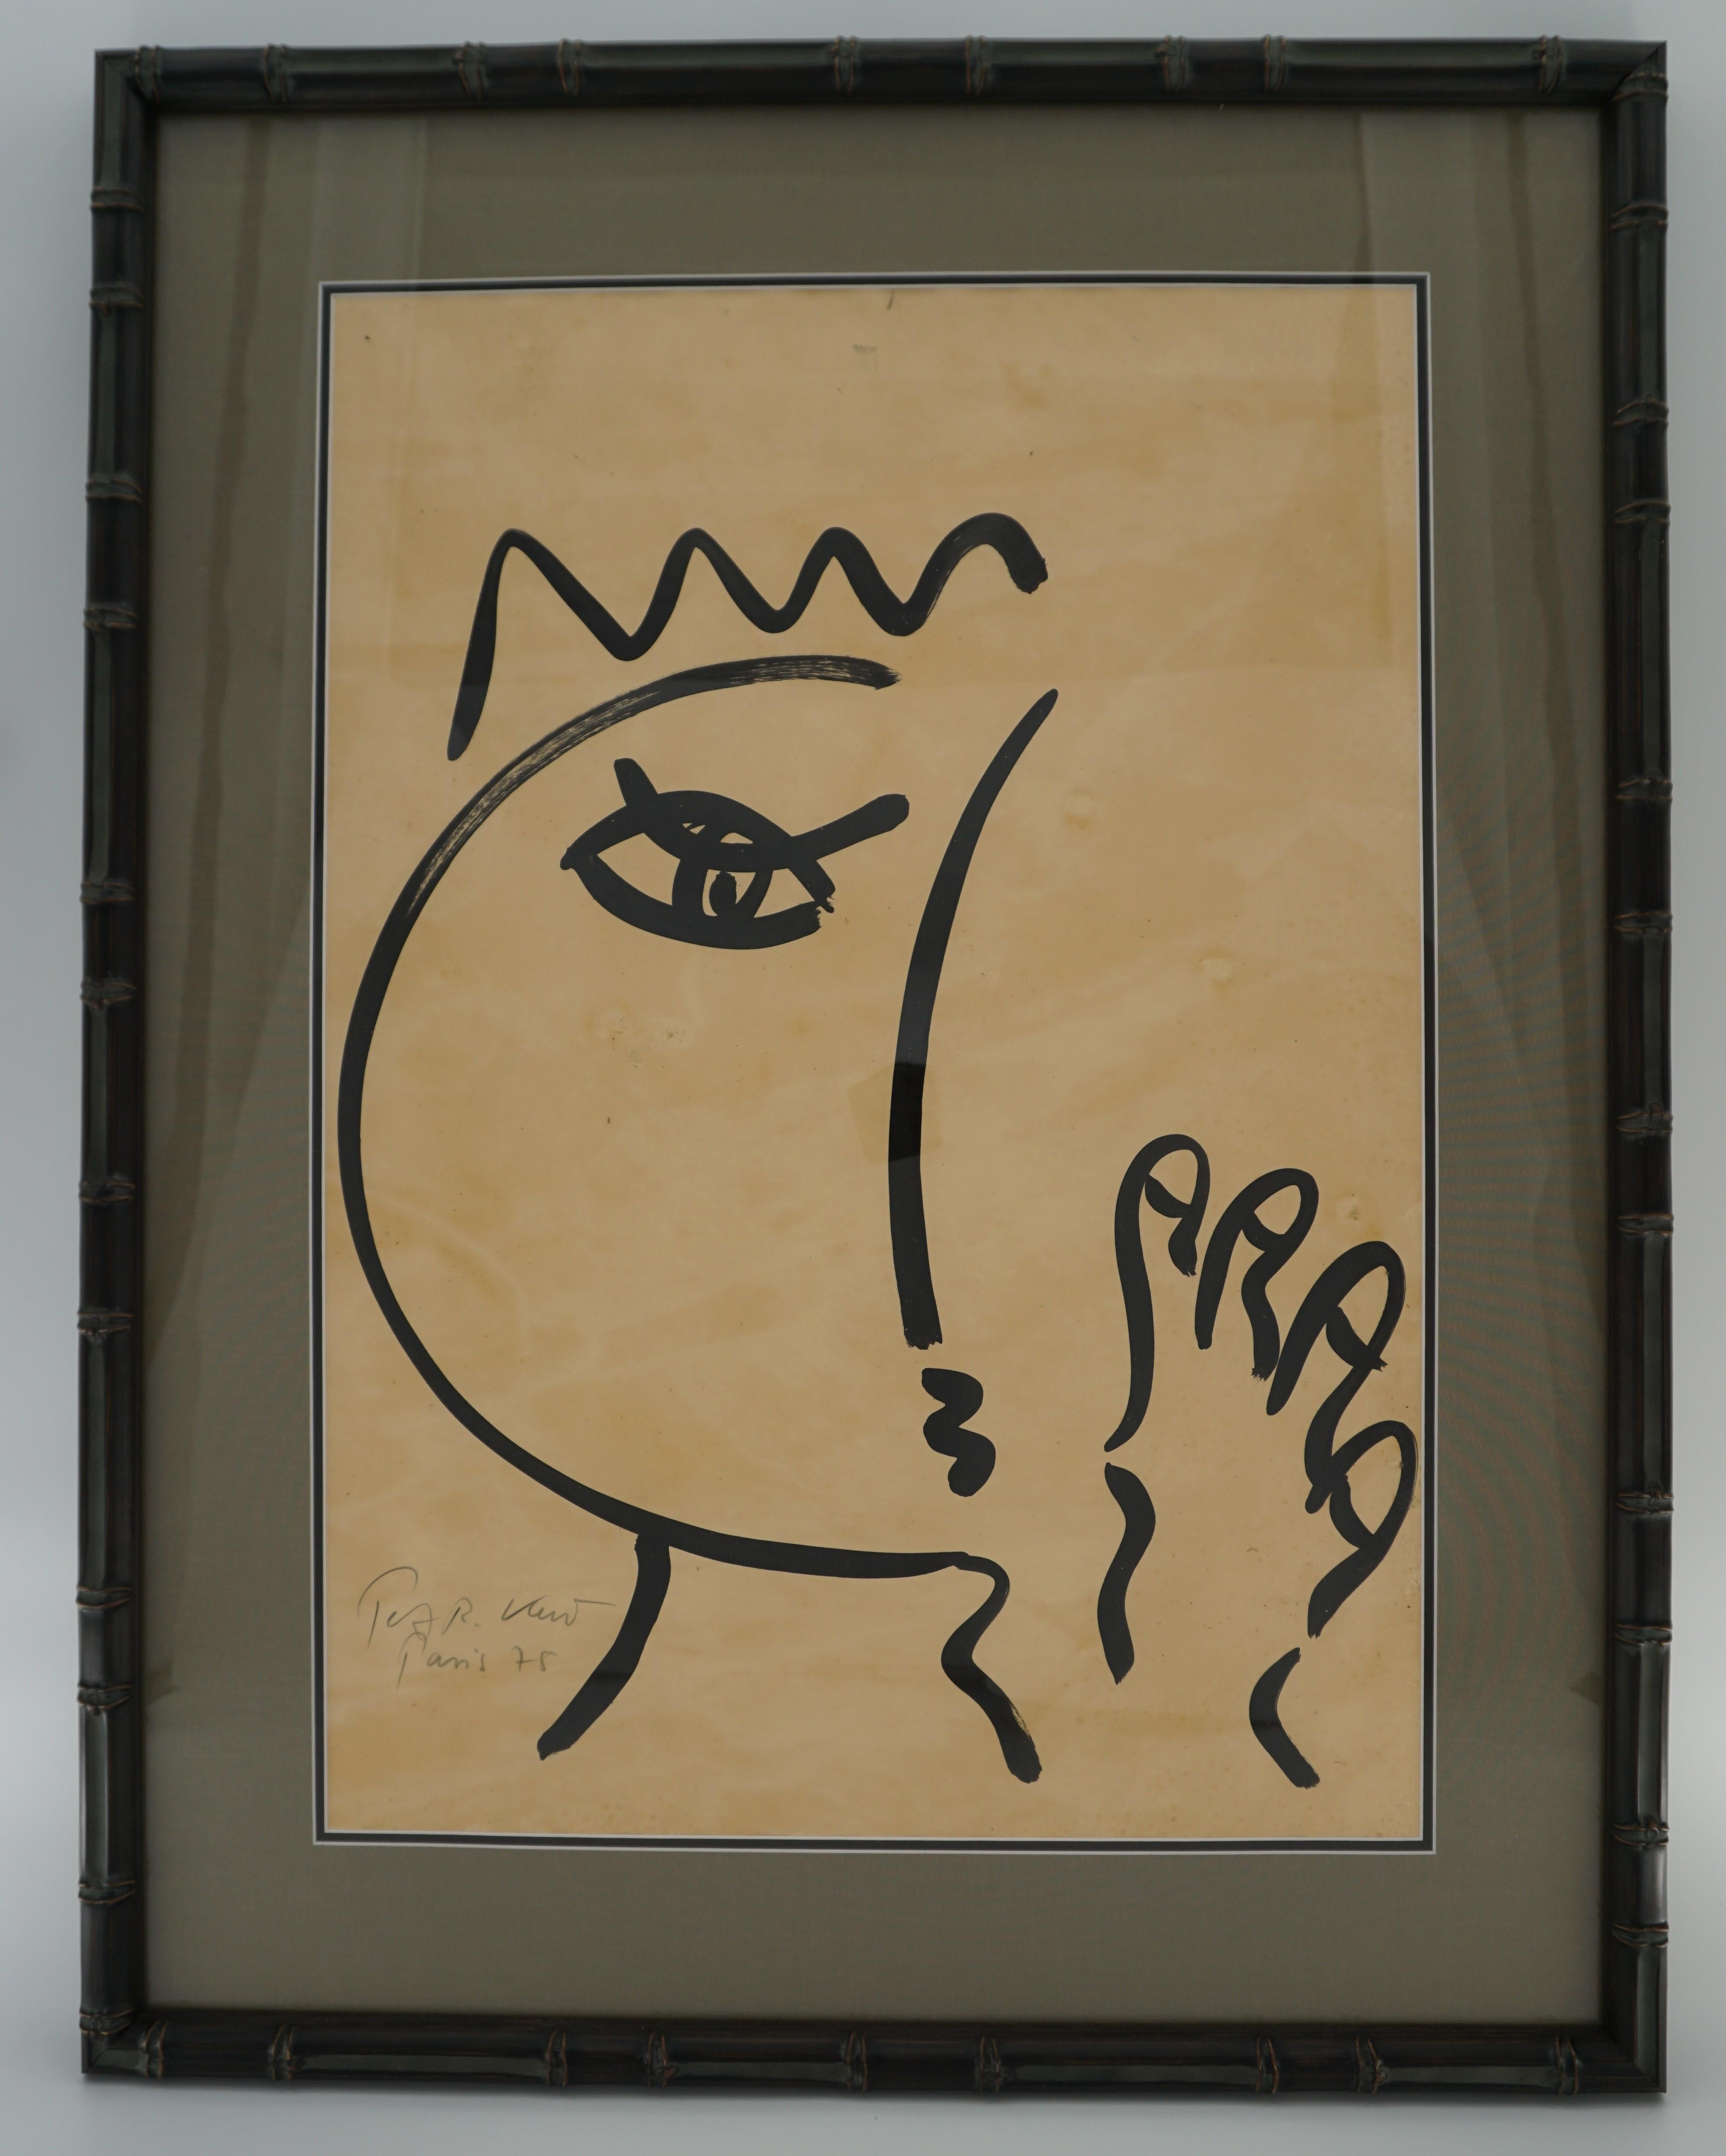 Hand-Painted Painting by Peter Keil, C 1975, New Frame with Linen Matting, Signed, on Paper